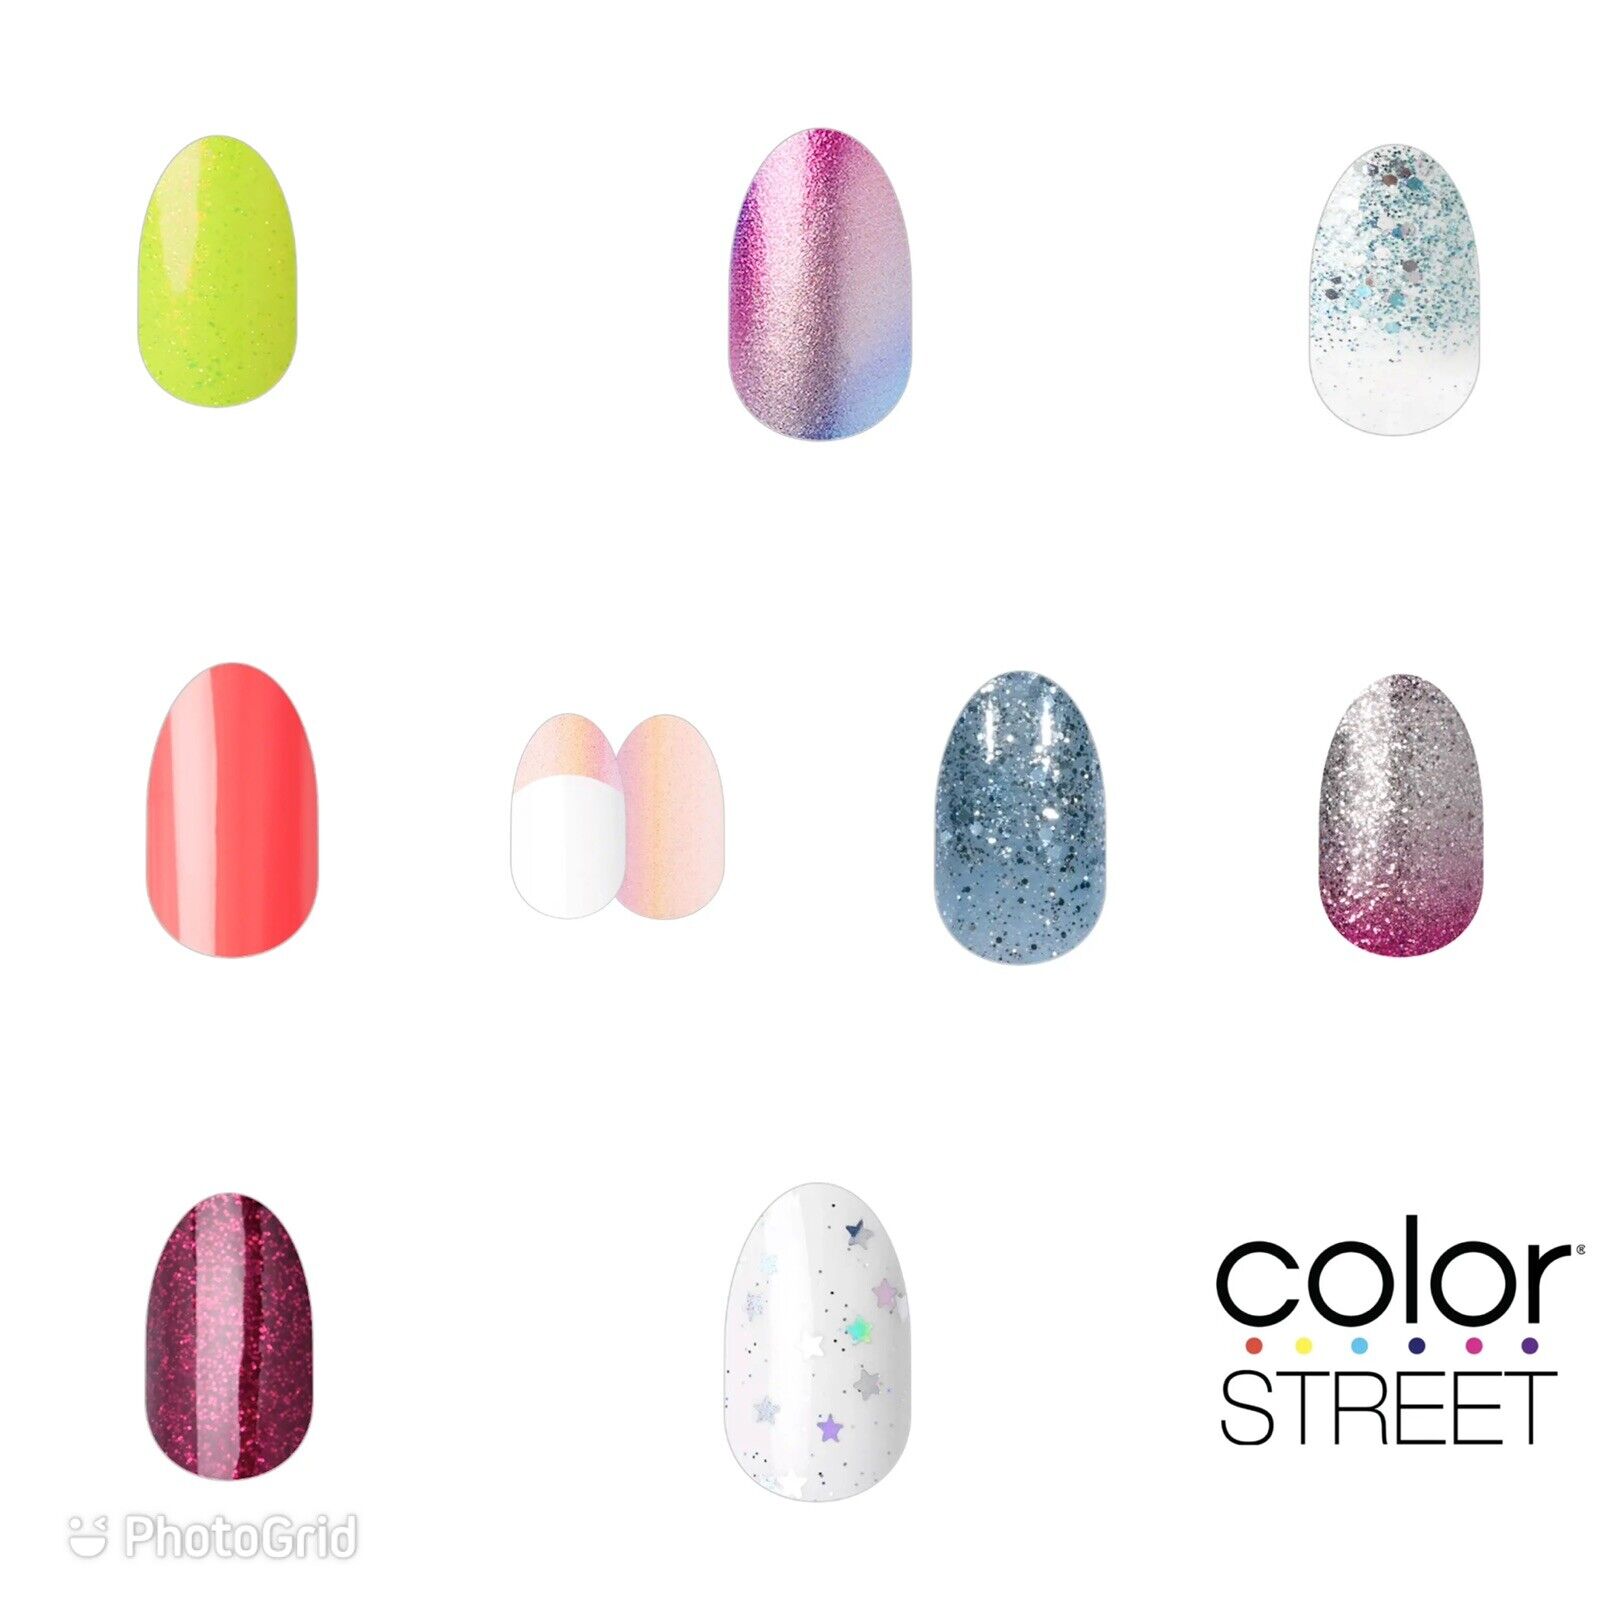 🎉NEW 💯 color STREET Nail Polish Current Limited HUGE INVENTORY